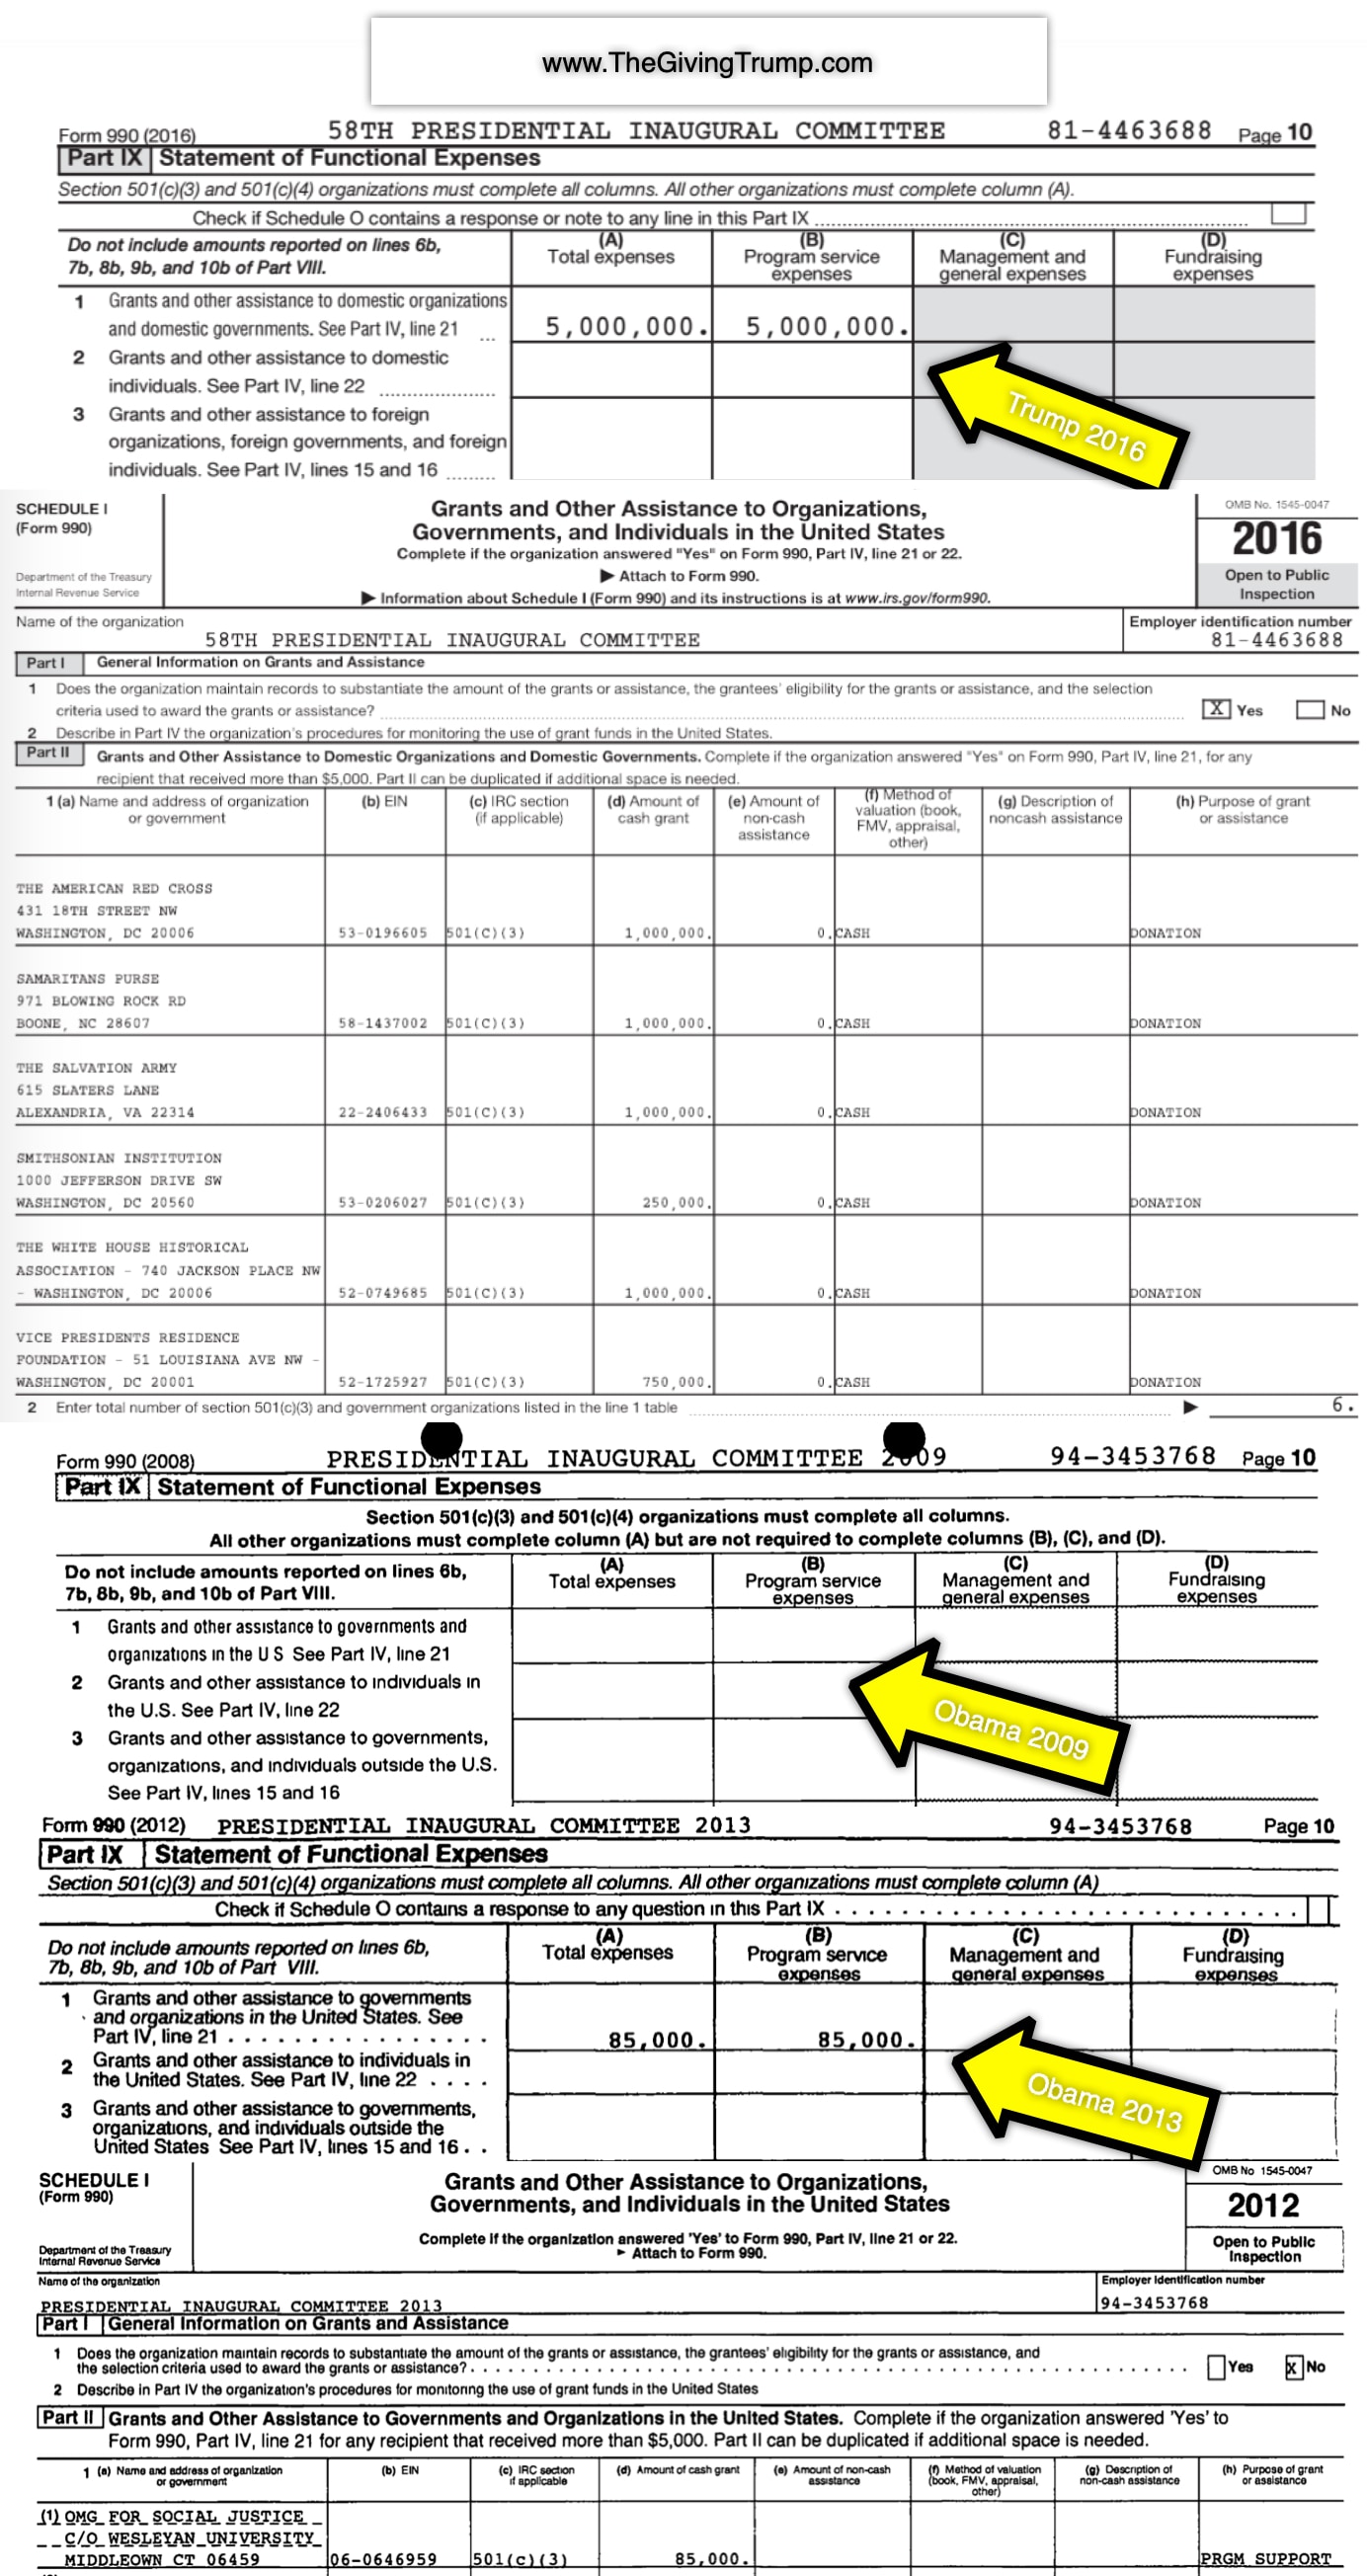 Trump Inaugural Committee 2017 Tax Form 990 showing charitable donations totaling $5 million